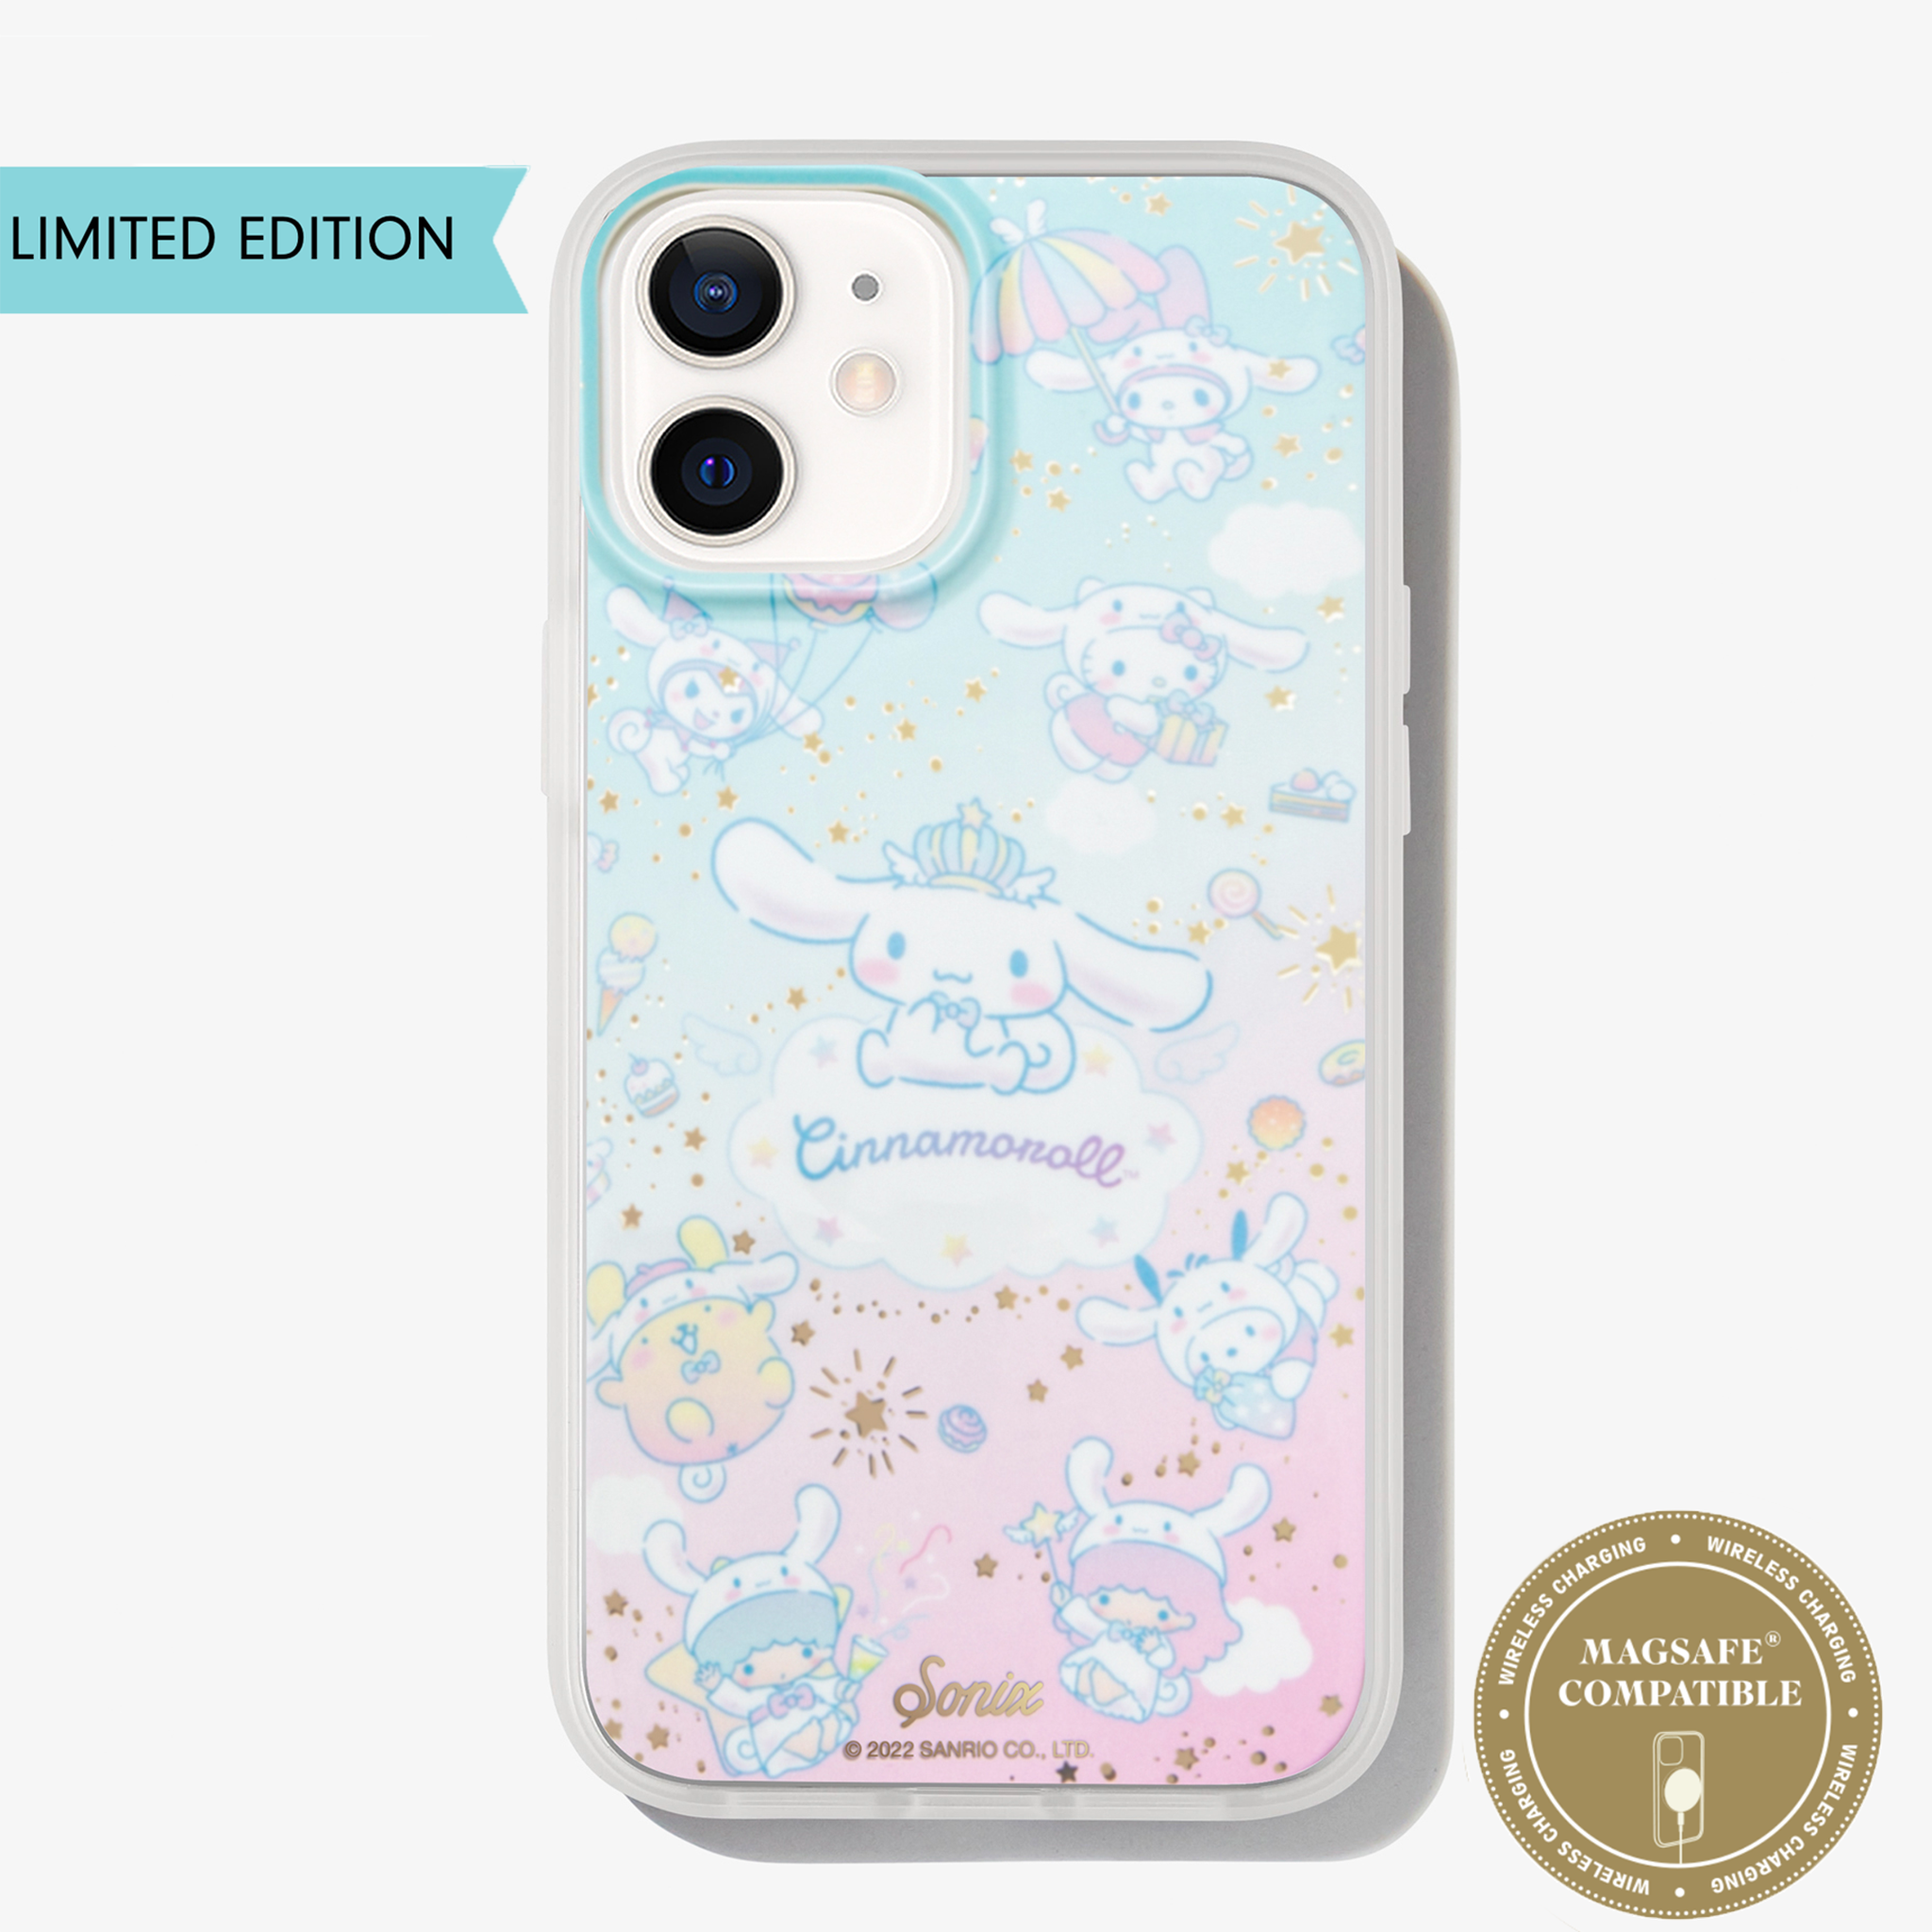 Dreamy Cinnamoroll™ MagSafe® Compatible iPhone Case